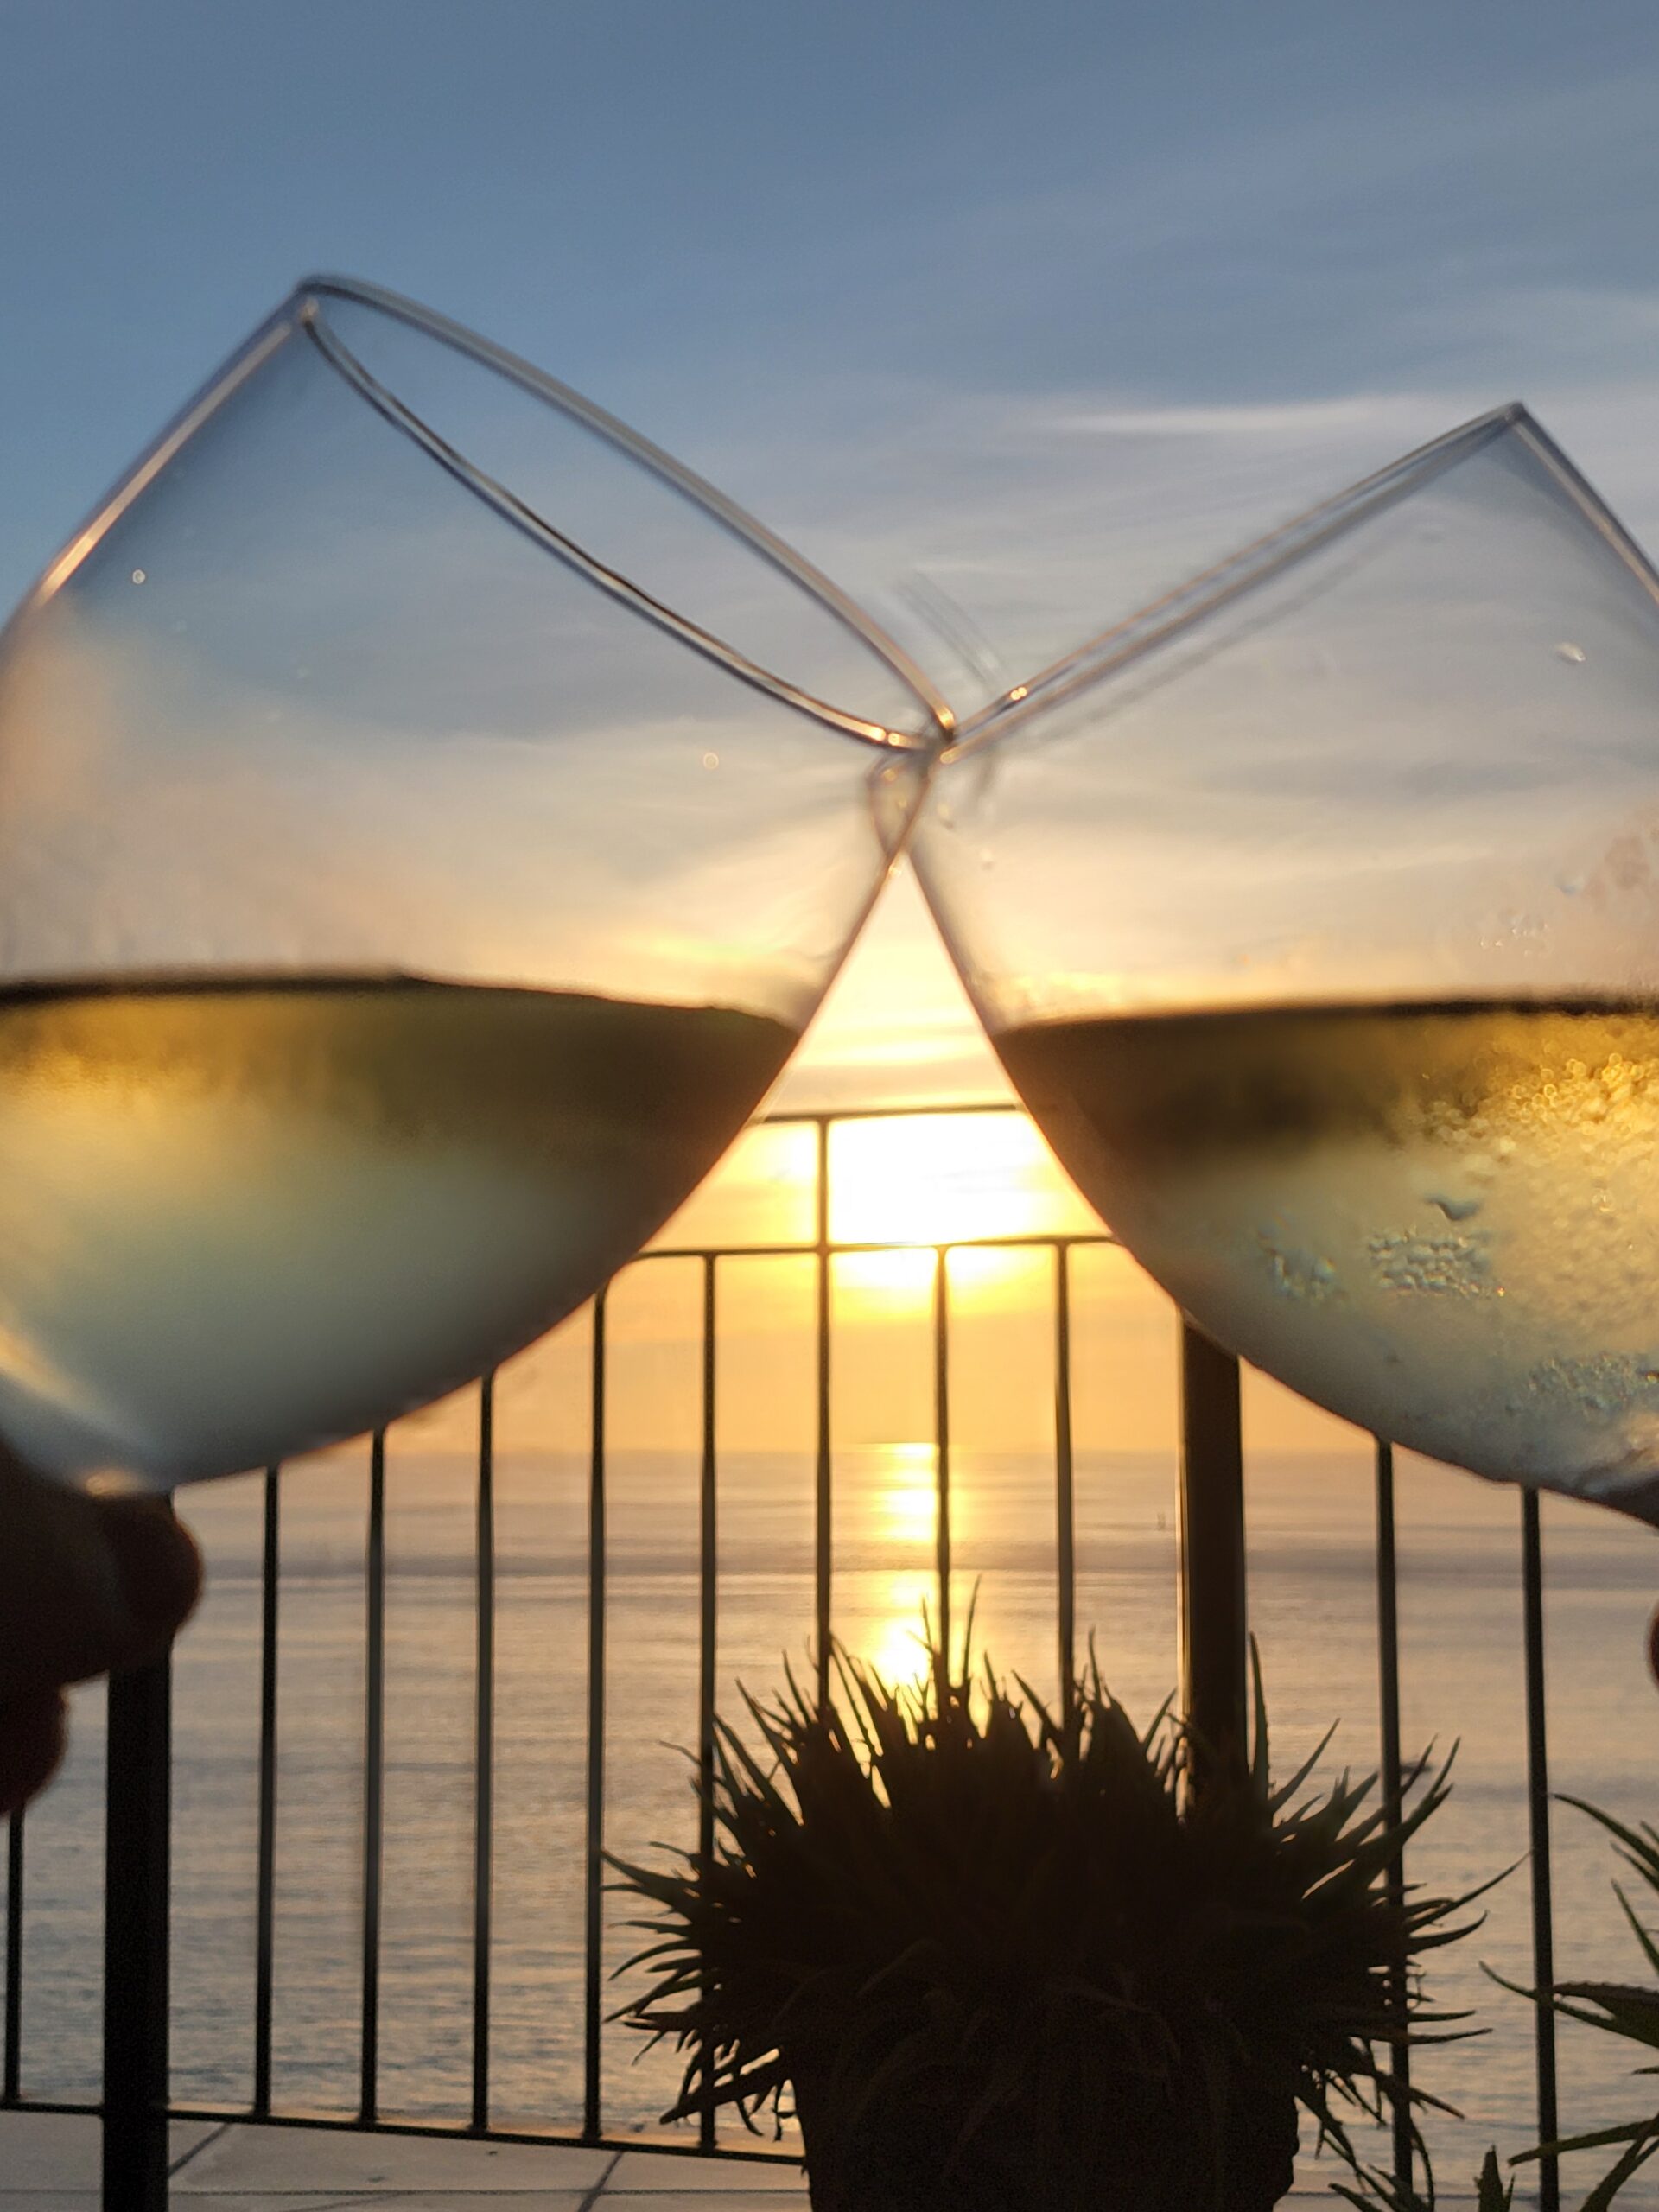 Two glasses of white wine clink together against a sunset over the ocean. The sun sits between the glasses, creating a beautiful effect. The glasses show condensation, indicating the wine is cool.